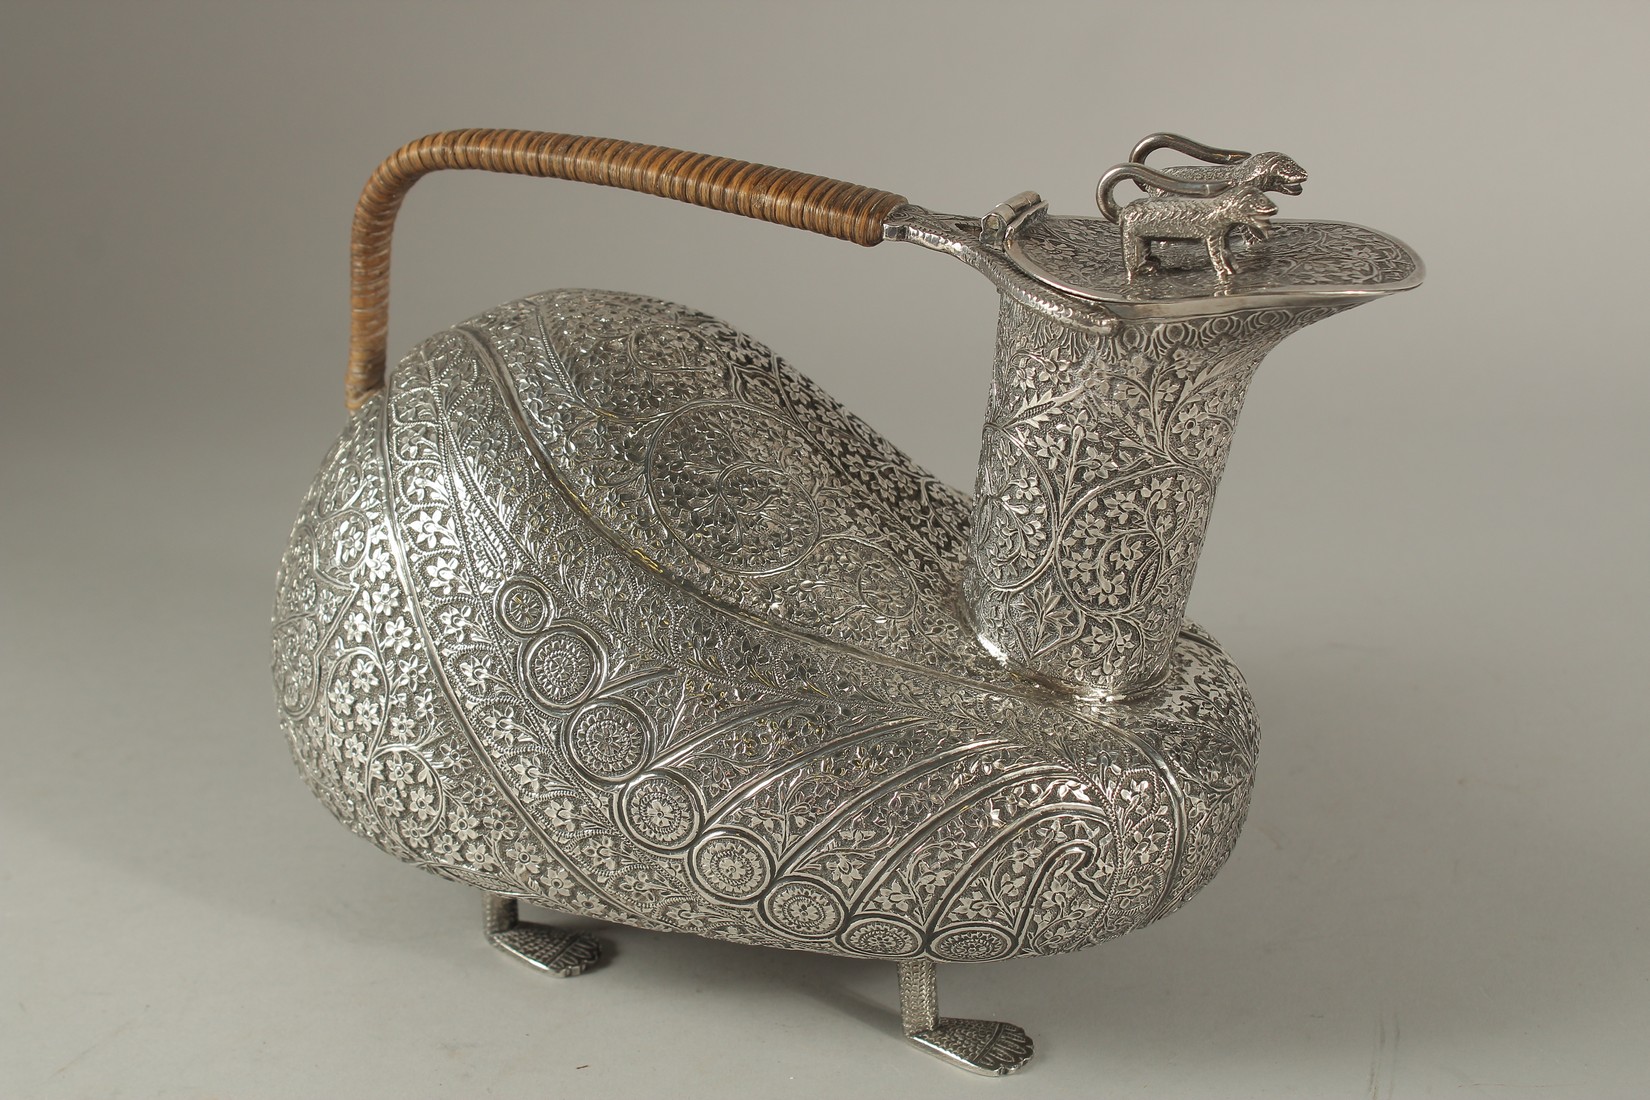 A VERY FINE AND UNUSUAL INDIAN KASHMIR ENGRAVED SILVER VESSEL, intricately chased with finely